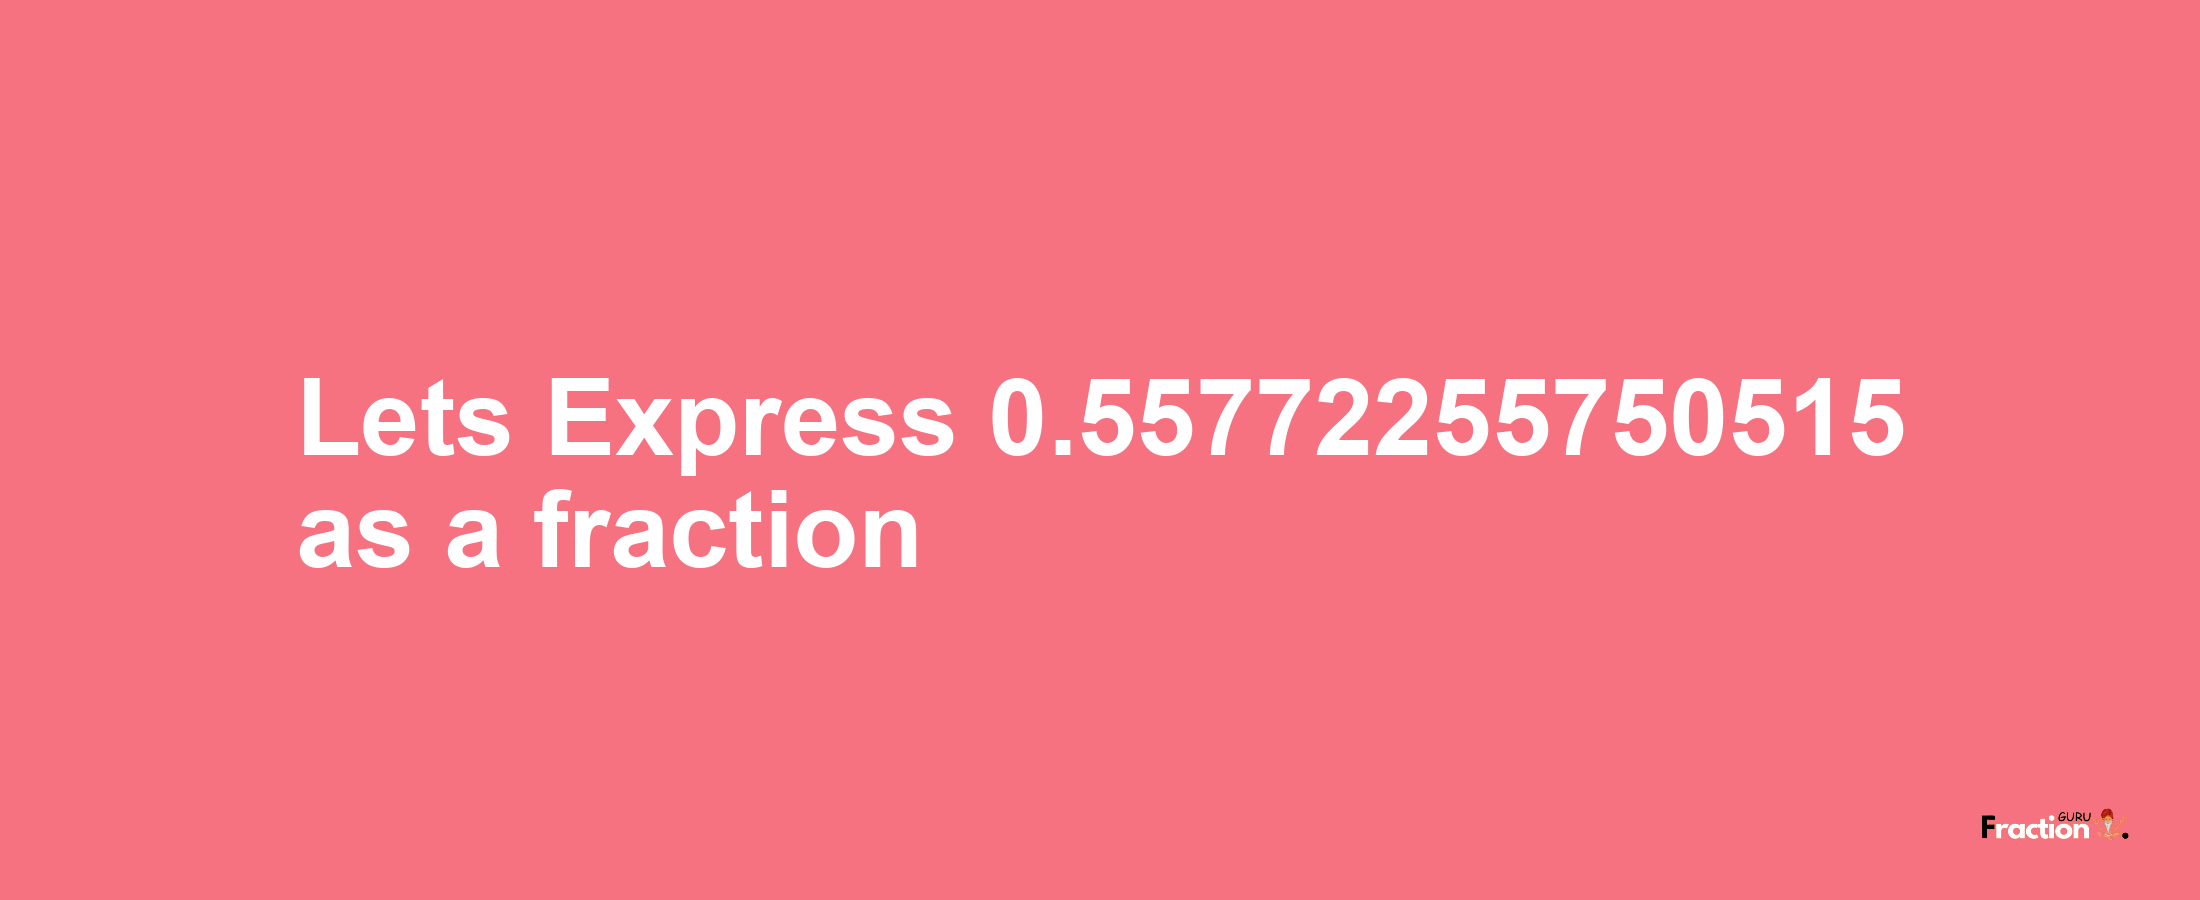 Lets Express 0.55772255750515 as afraction